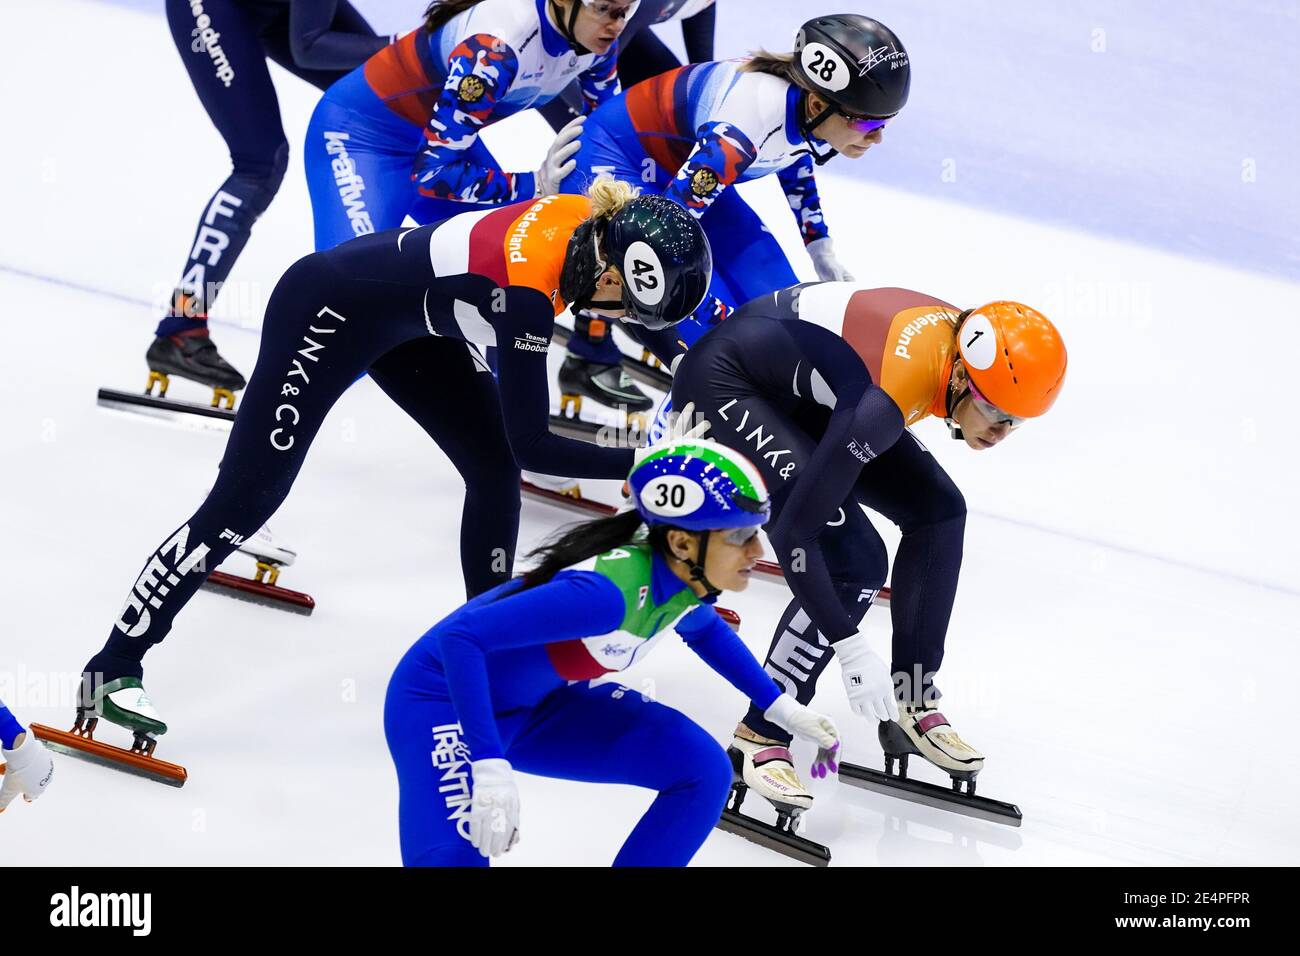 GDANSK, POLAND - JANUARY 24: Xandra Velzeboer of The Netherlands, Suzanne  Schulting of The Netherlands during the ISU European Short Track Speed  Skating Championships at Olivia Hal on January 24, 2021 in